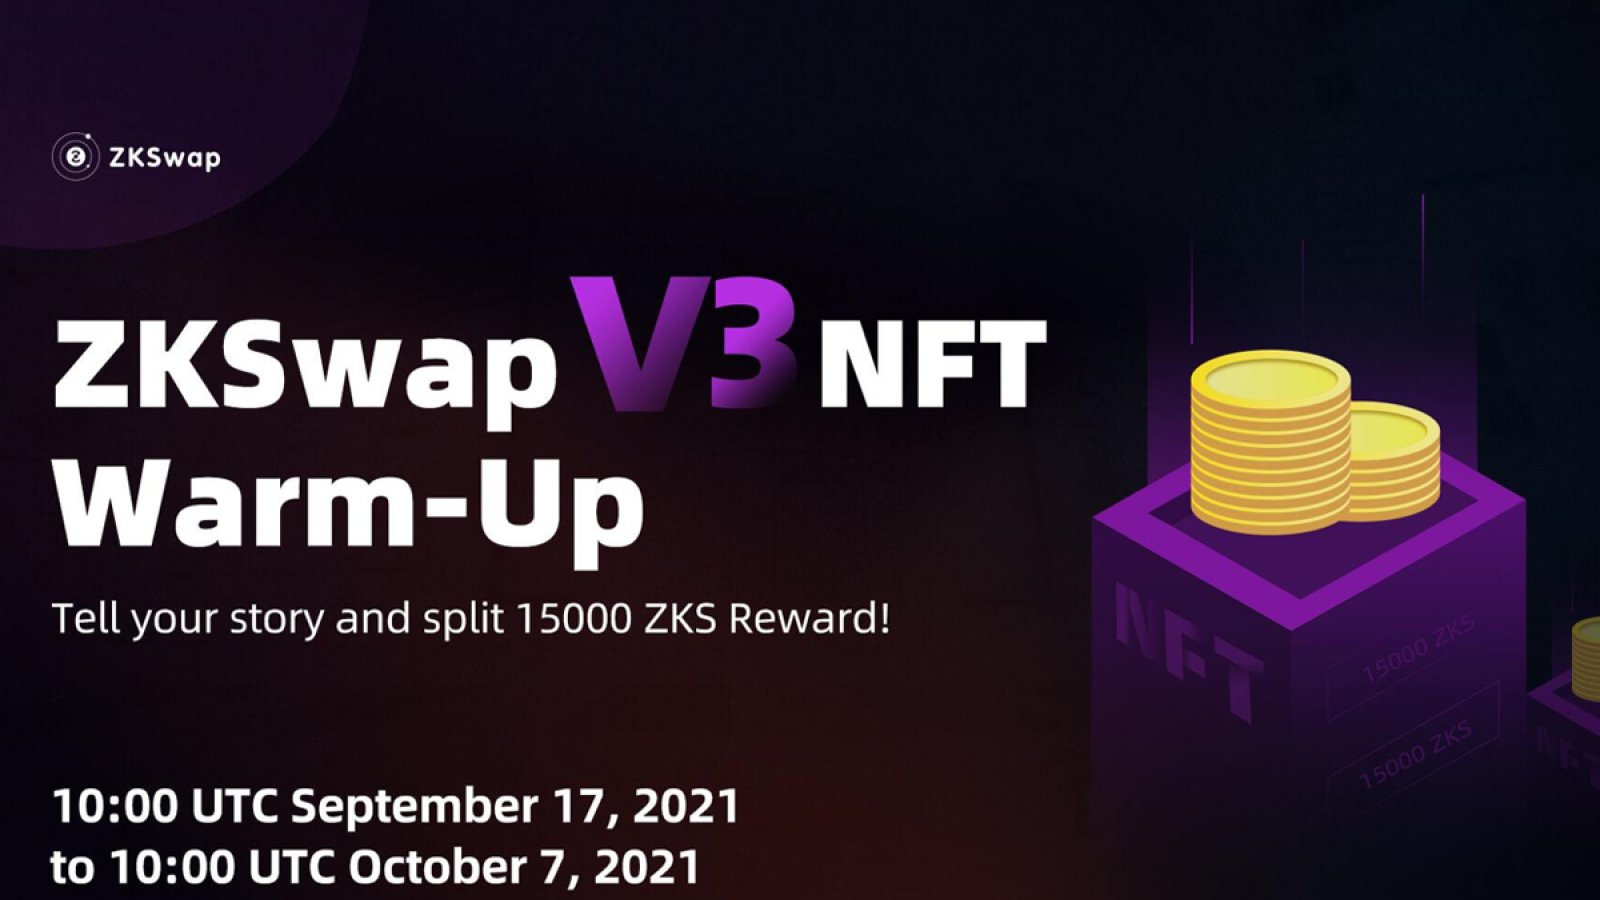 ZKSwap Announces 15000 ZKS Airdrop Campaign as a Teaser Prior to the V3 Launching